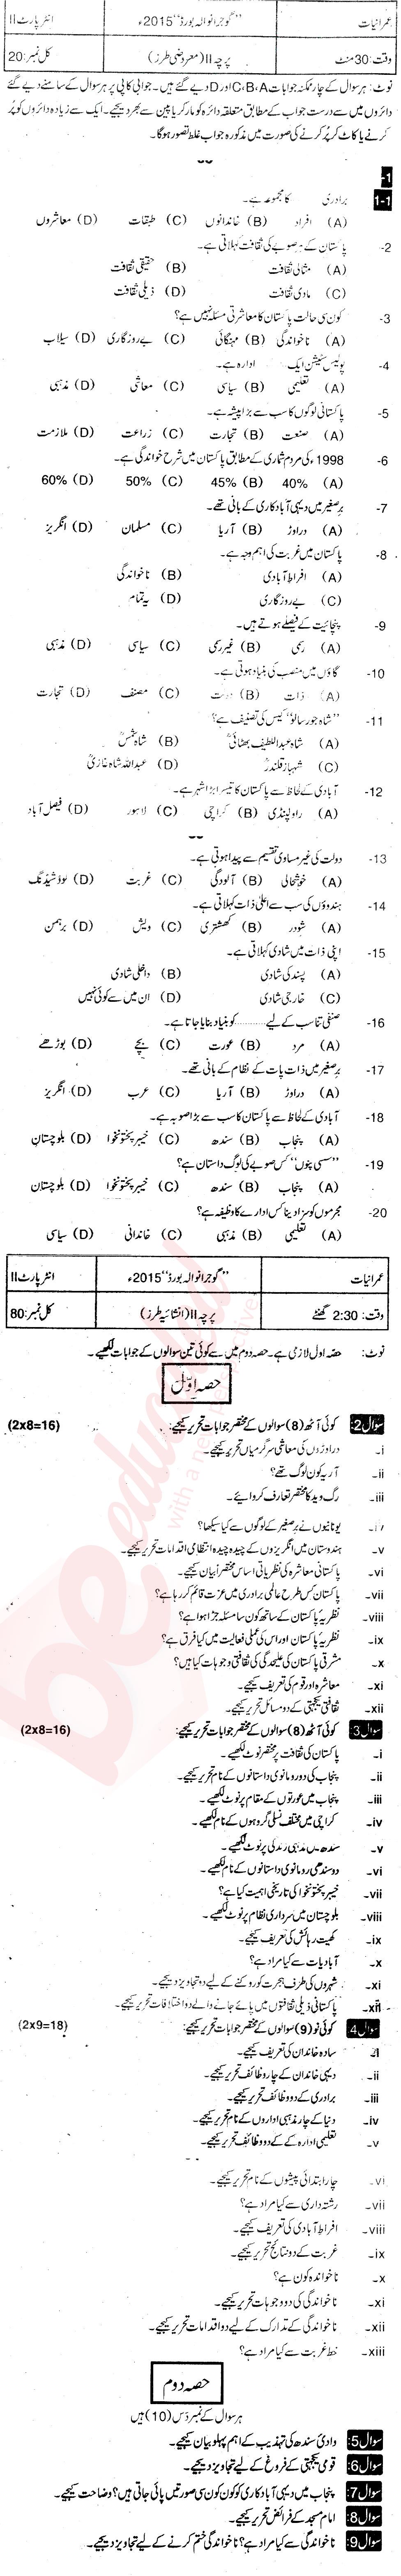 Sociology FA Part 2 Past Paper Group 1 BISE Gujranwala 2015